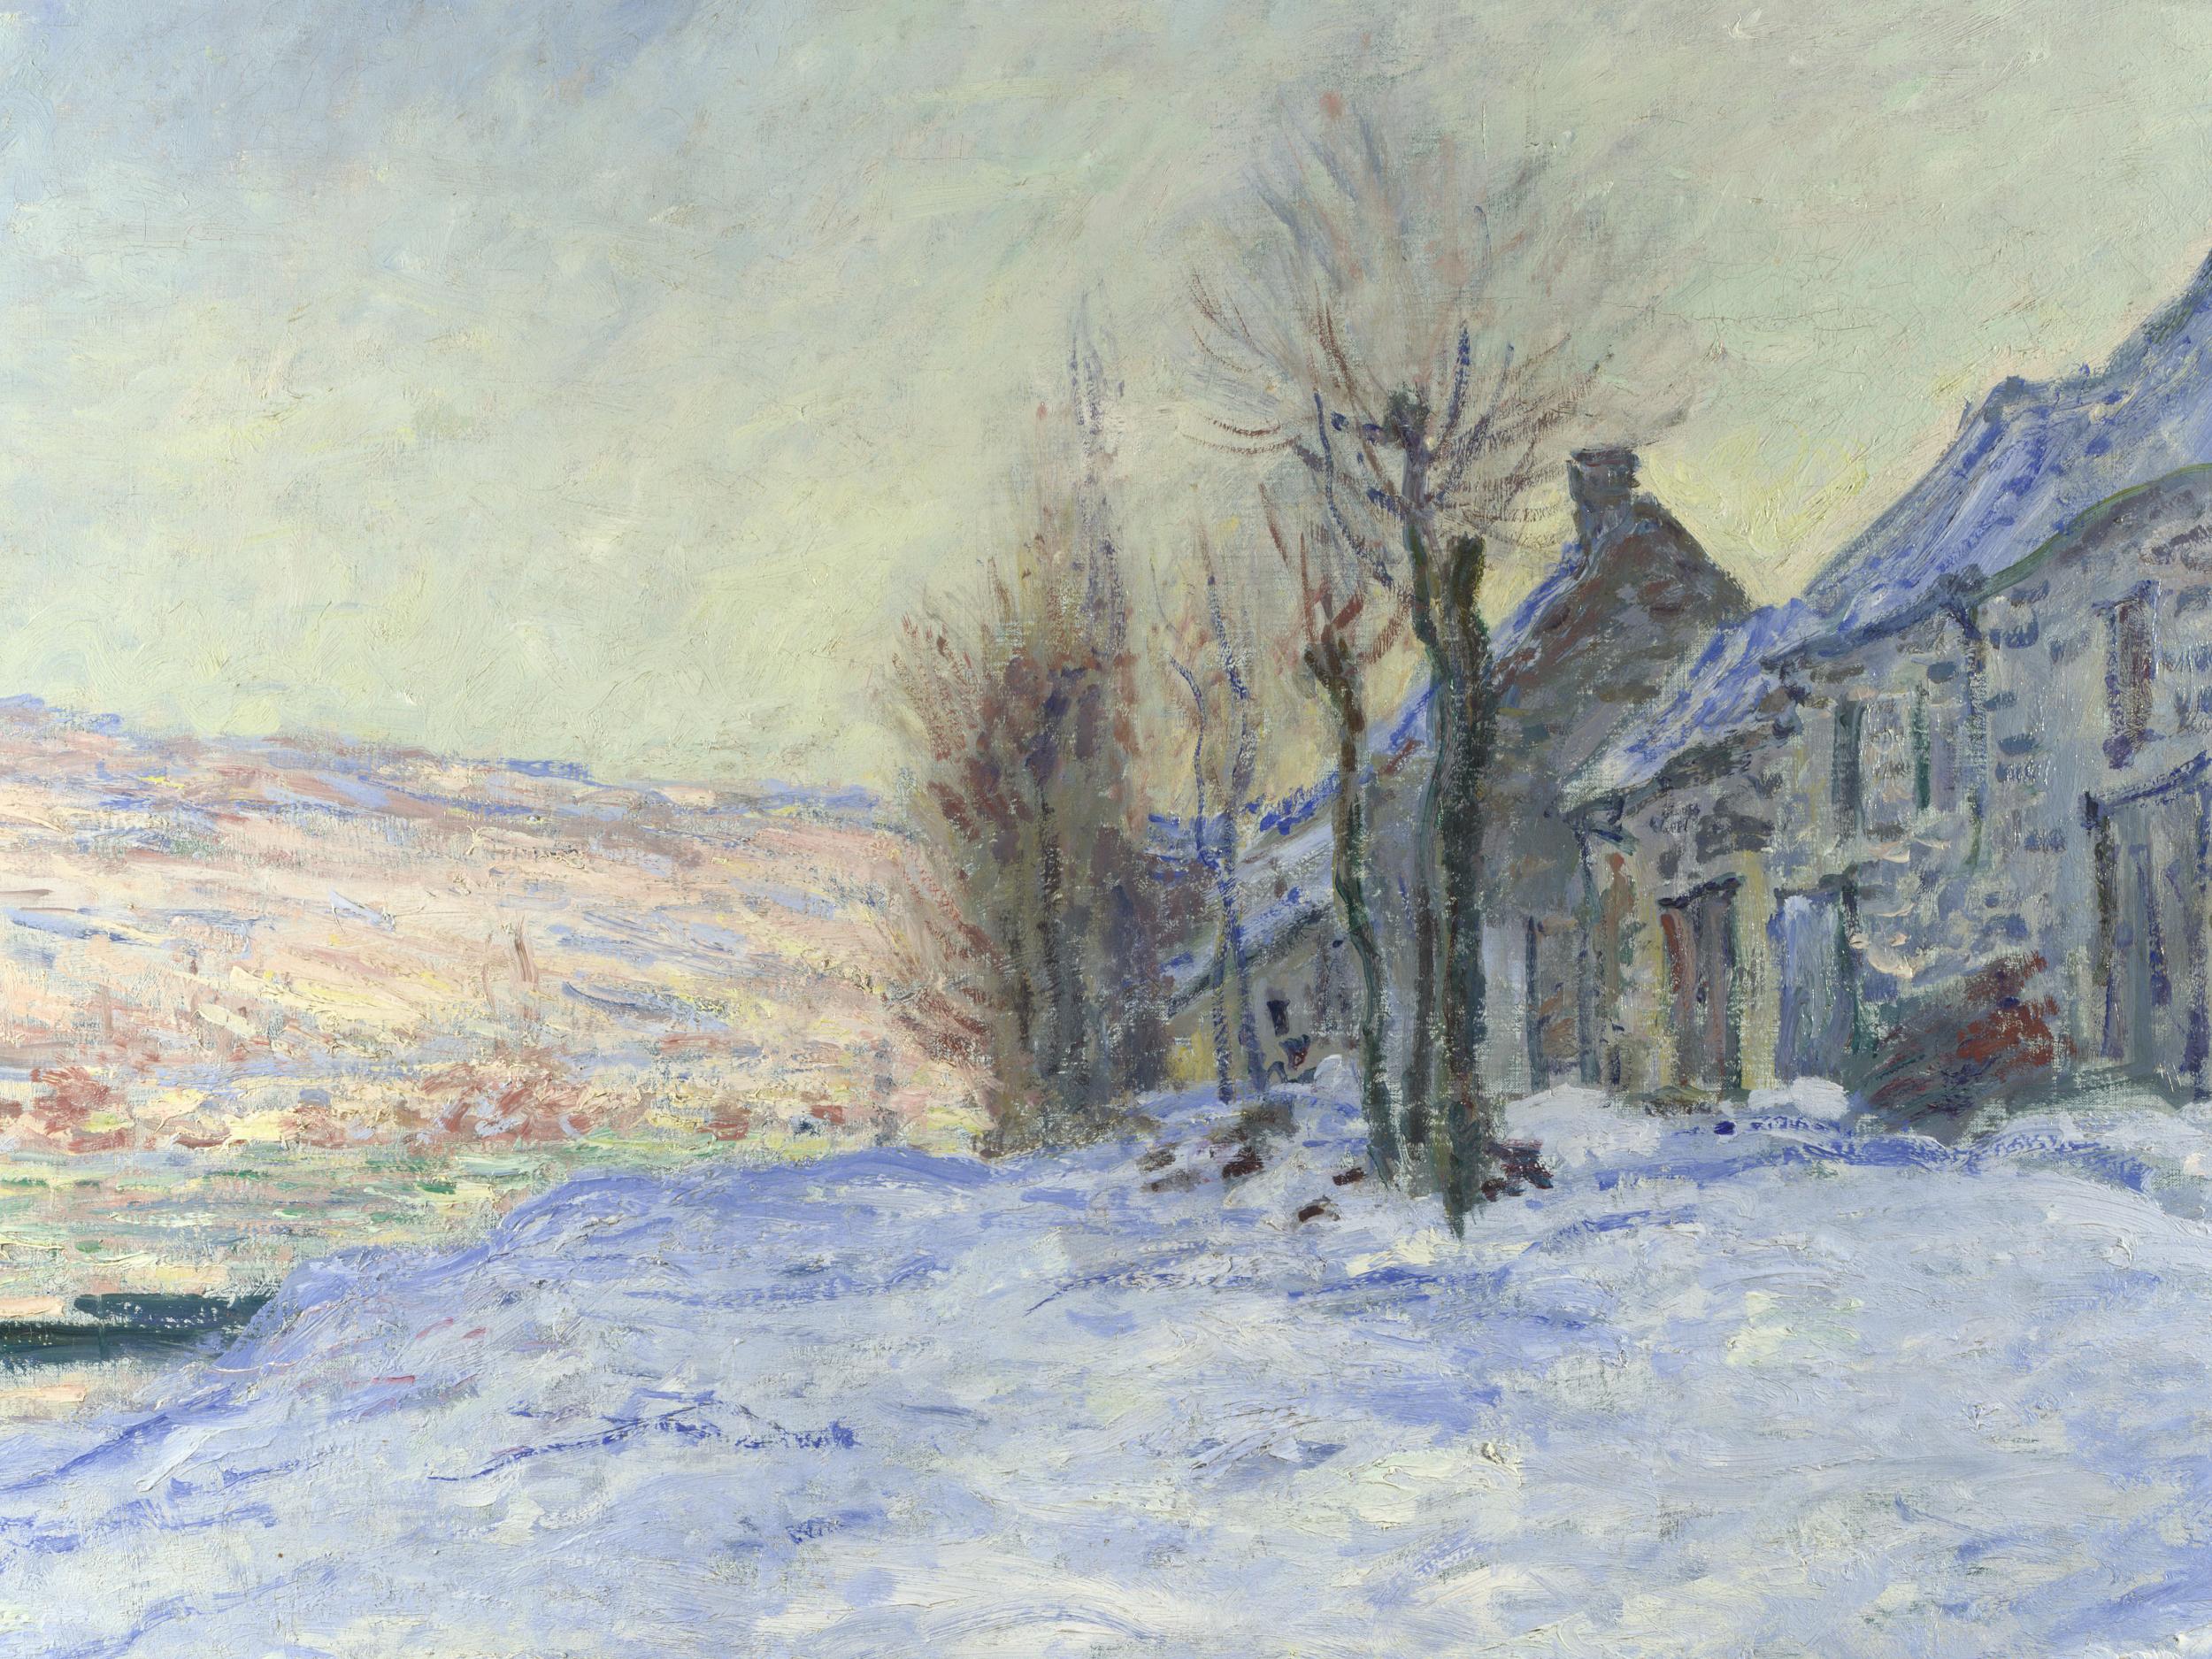 The collection is made up of priceless impressionist masterpieces, like Monet's 'Lavacourt Under Snow'